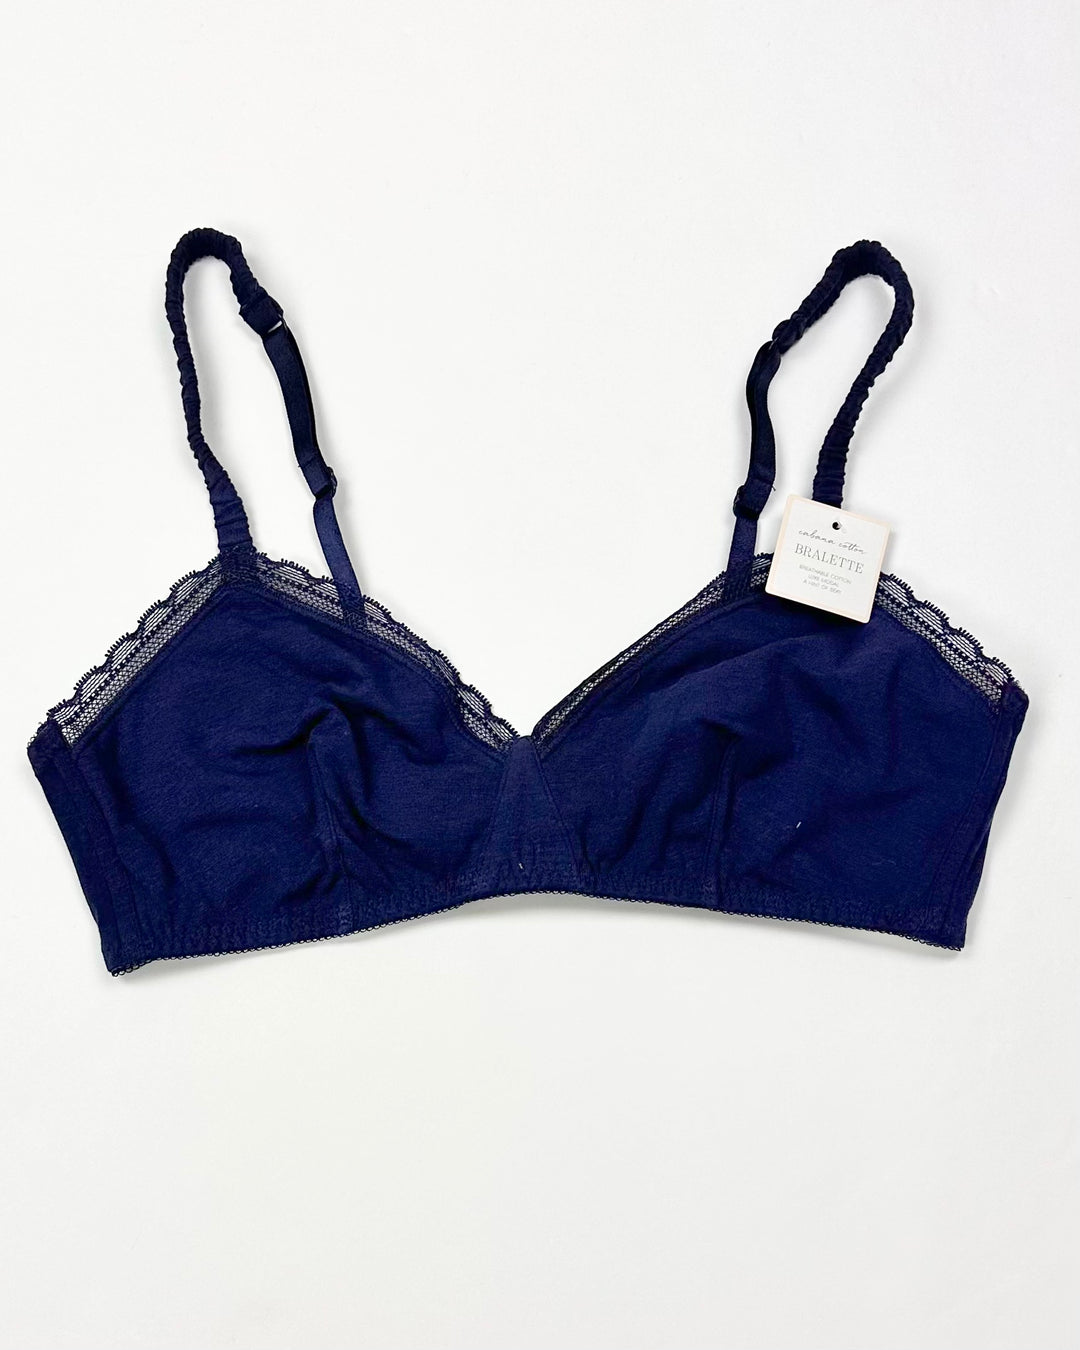 Navy Blue Bralette - Small and Large